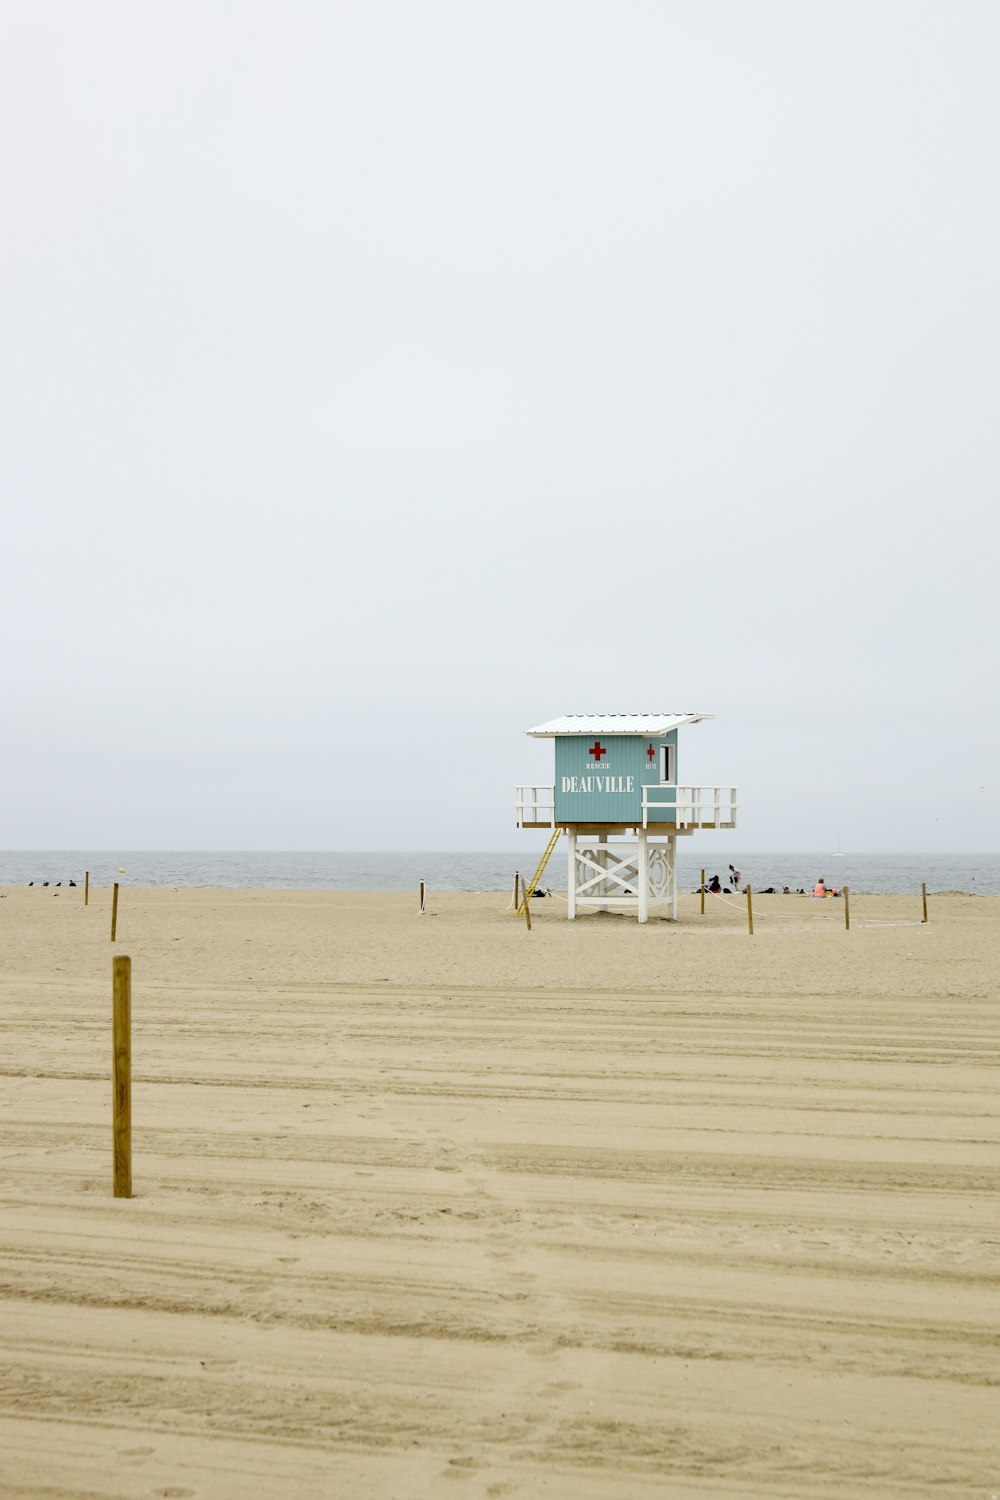 blue and white lifeguard tower on beach